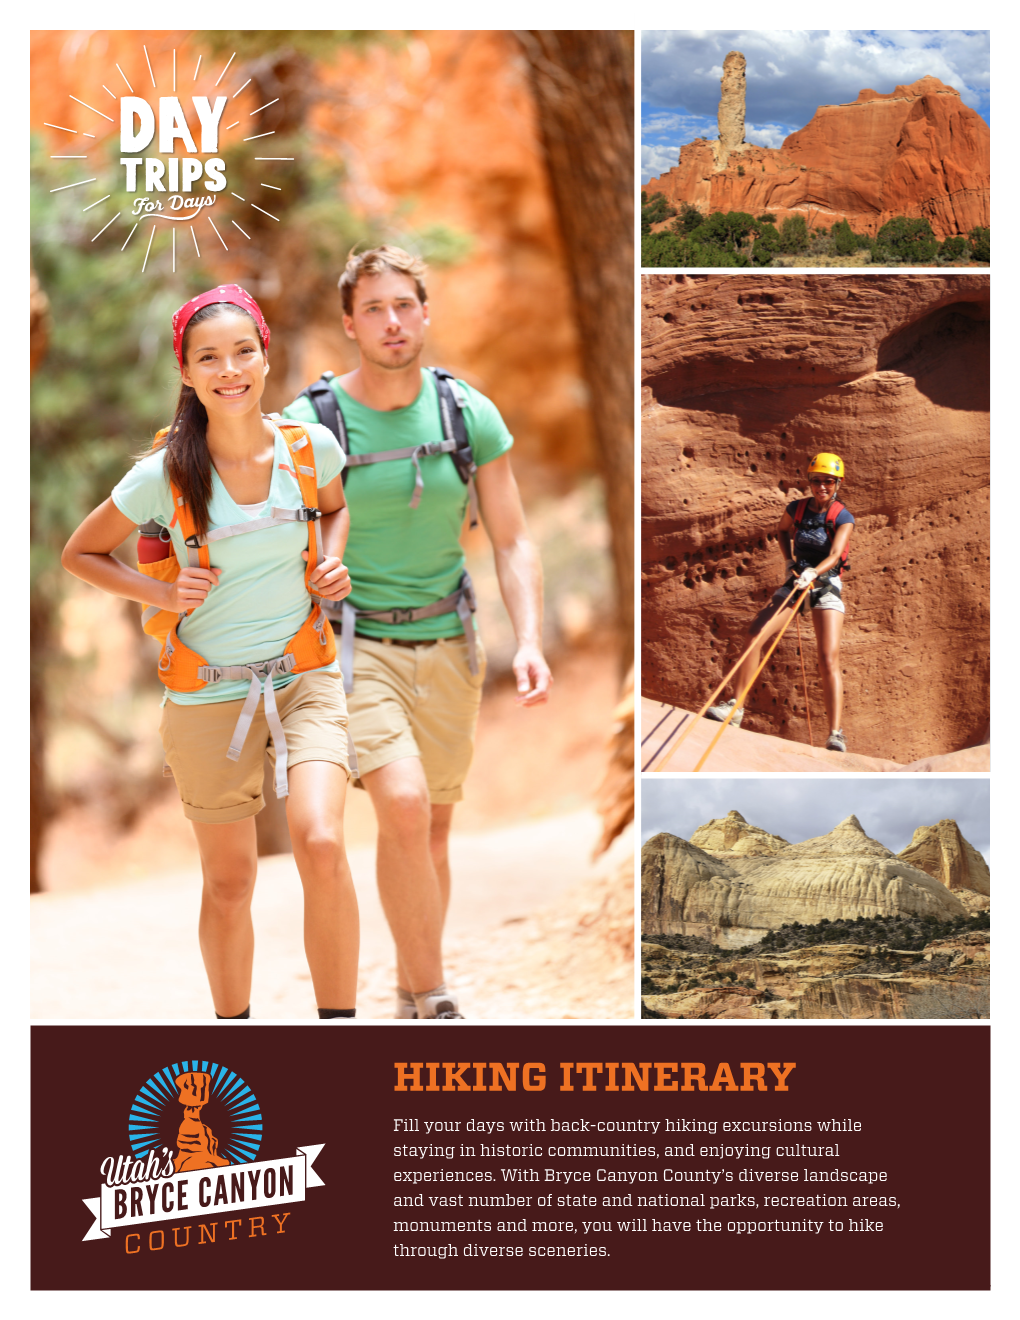 HIKING ITINERARY Fill Your Days with Back-Country Hiking Excursions While Staying in Historic Communities, and Enjoying Cultural Experiences